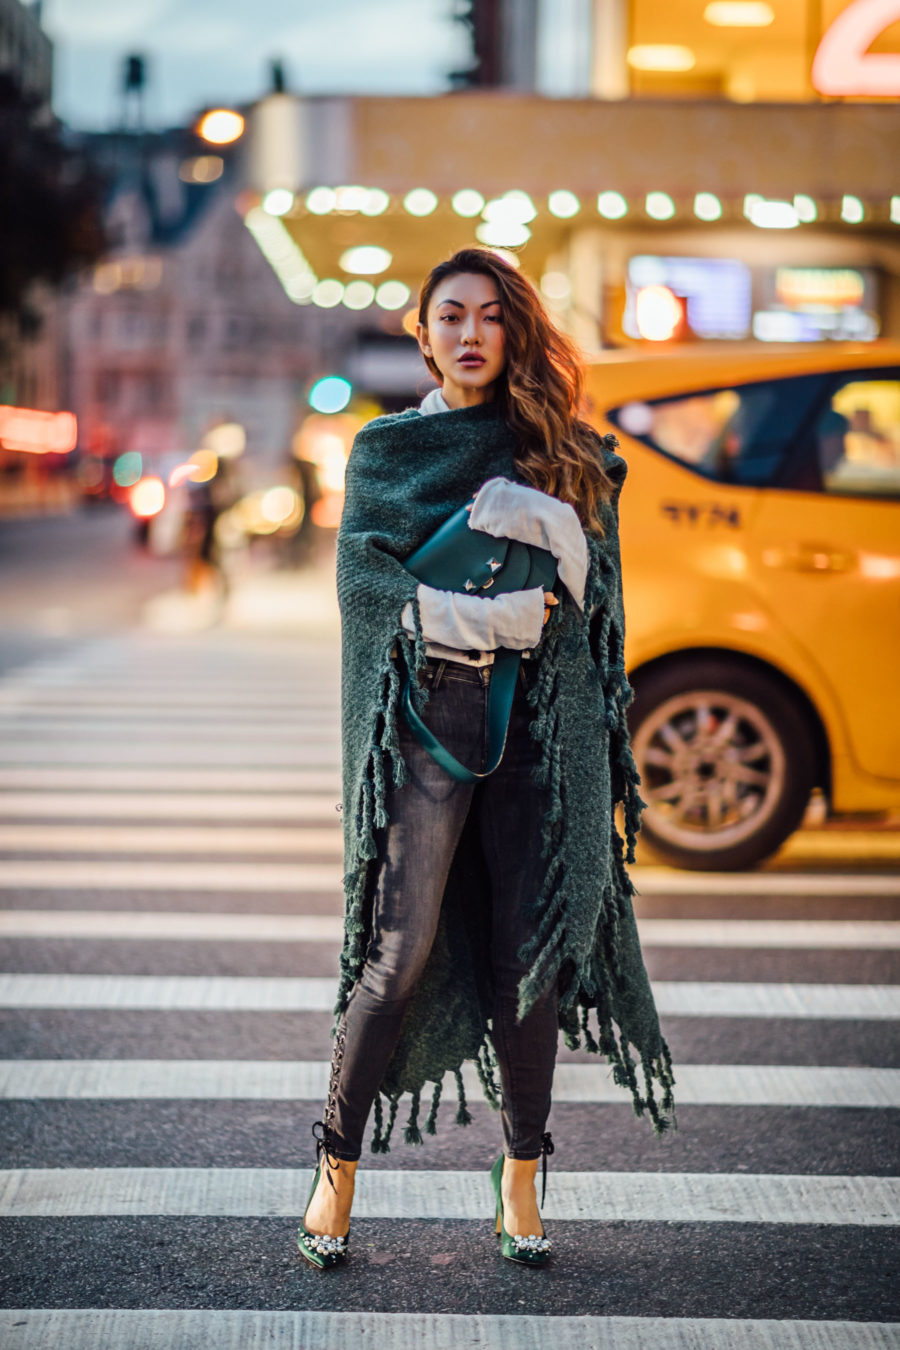 New jacket styles for fall 2018 - green fringe poncho, green cape // Notjessfashion.com